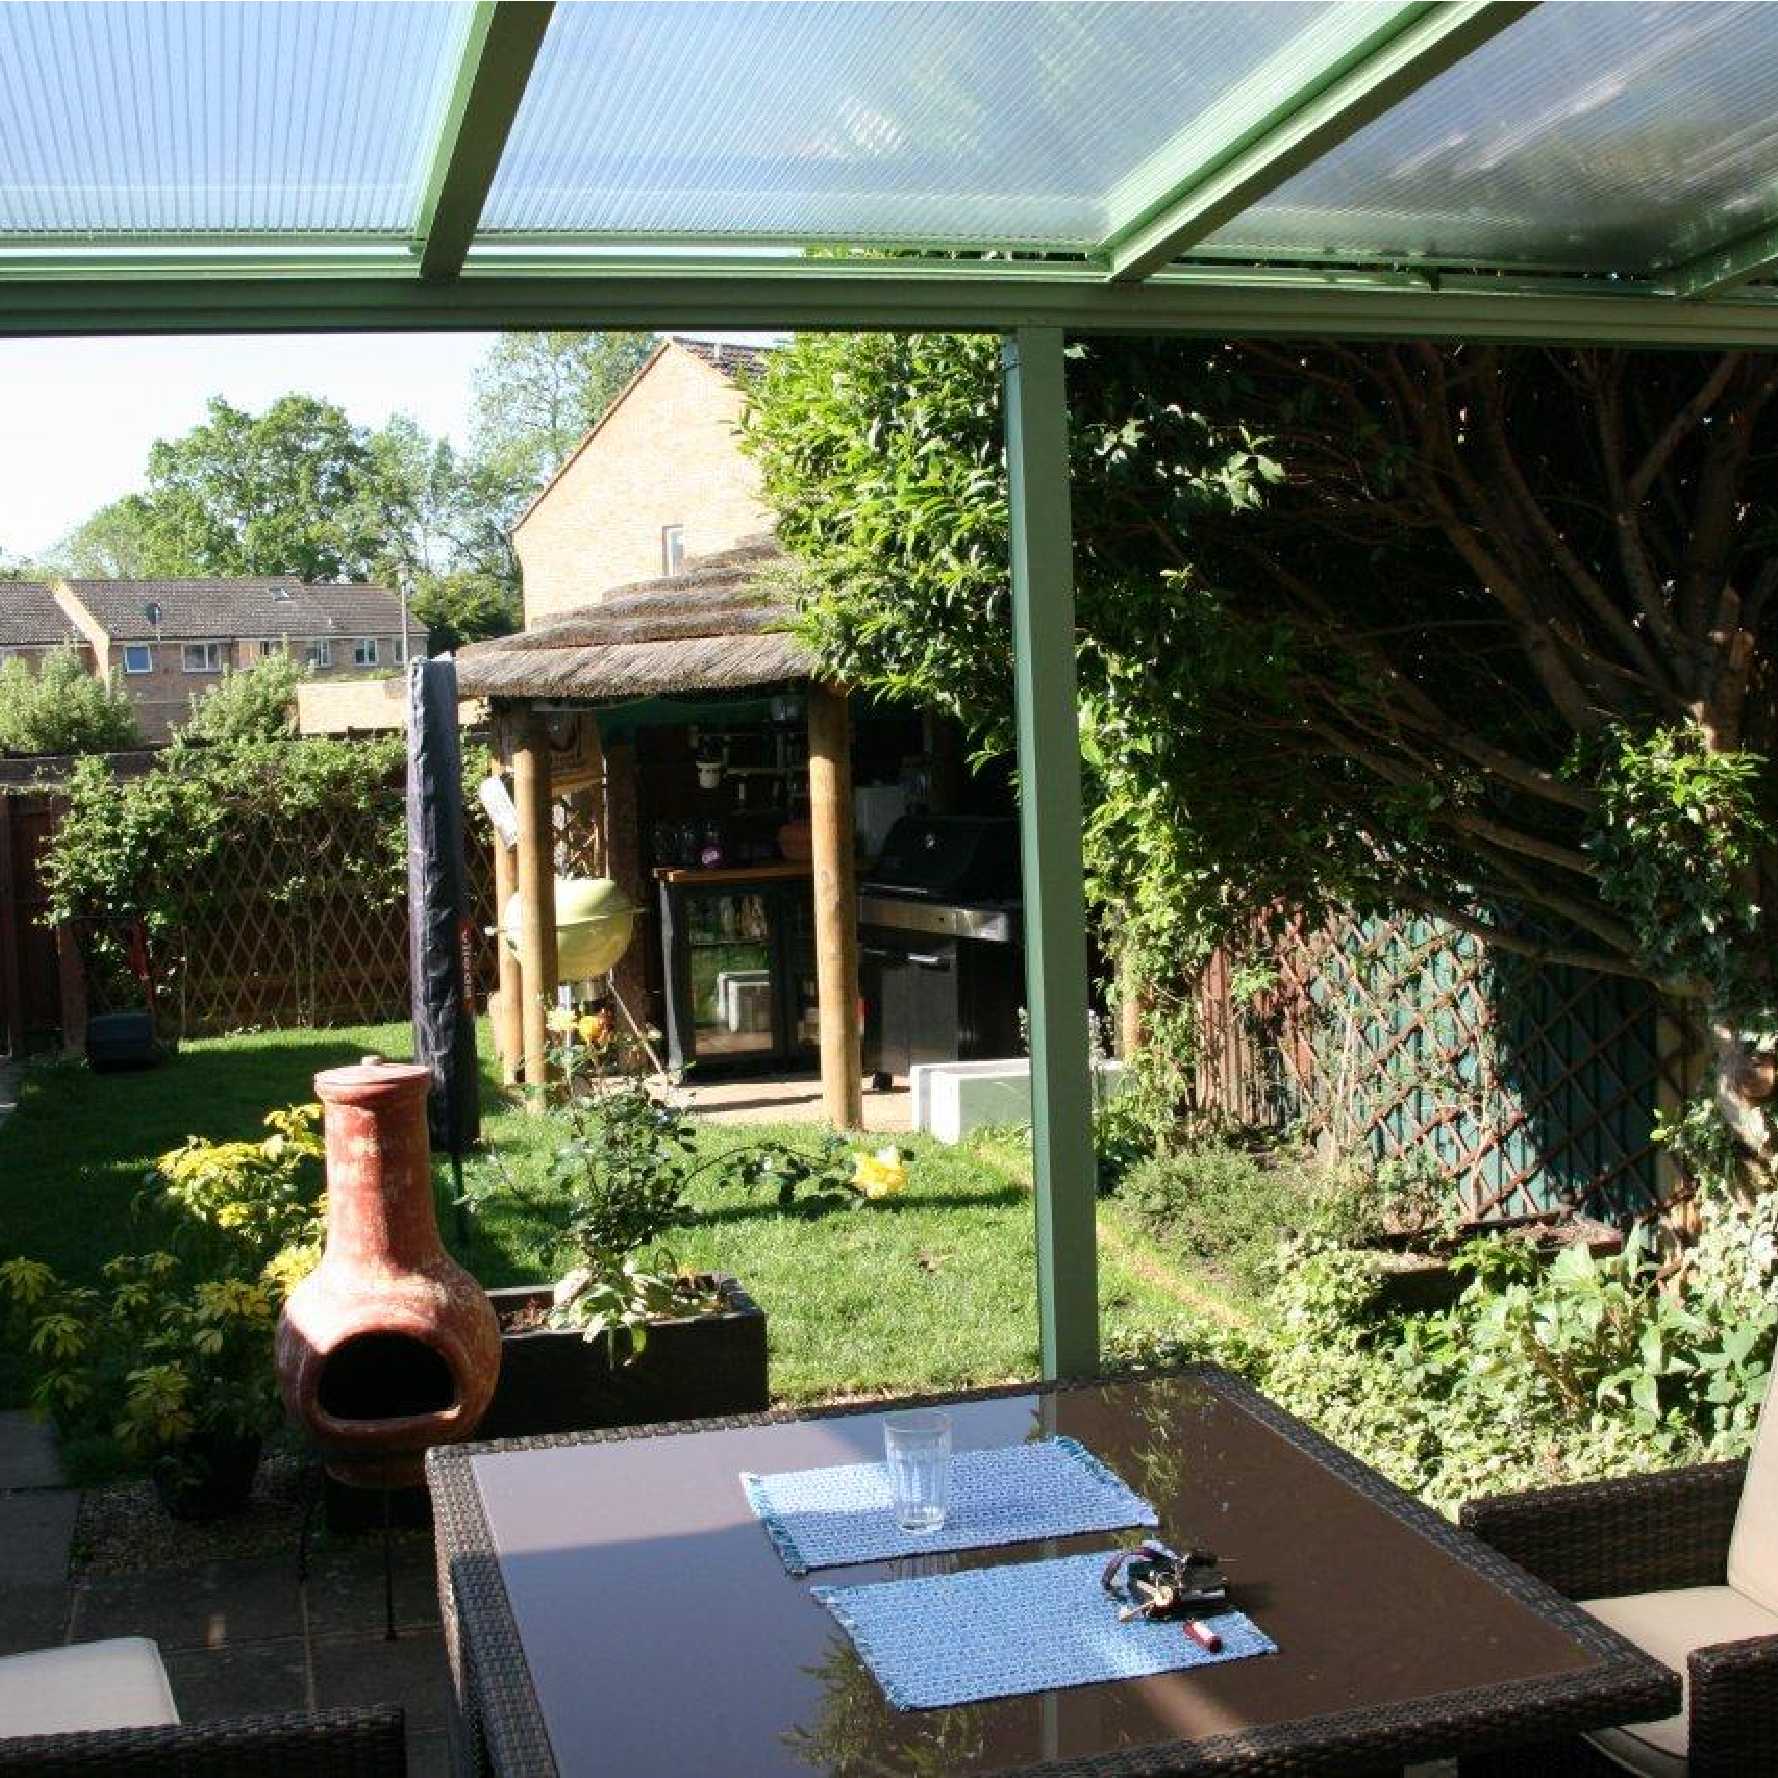 Affordable Omega Smart Lean-To Canopy, White with 16mm Polycarbonate Glazing - 5.2m (W) x 4.5m (P), (3) Supporting Posts